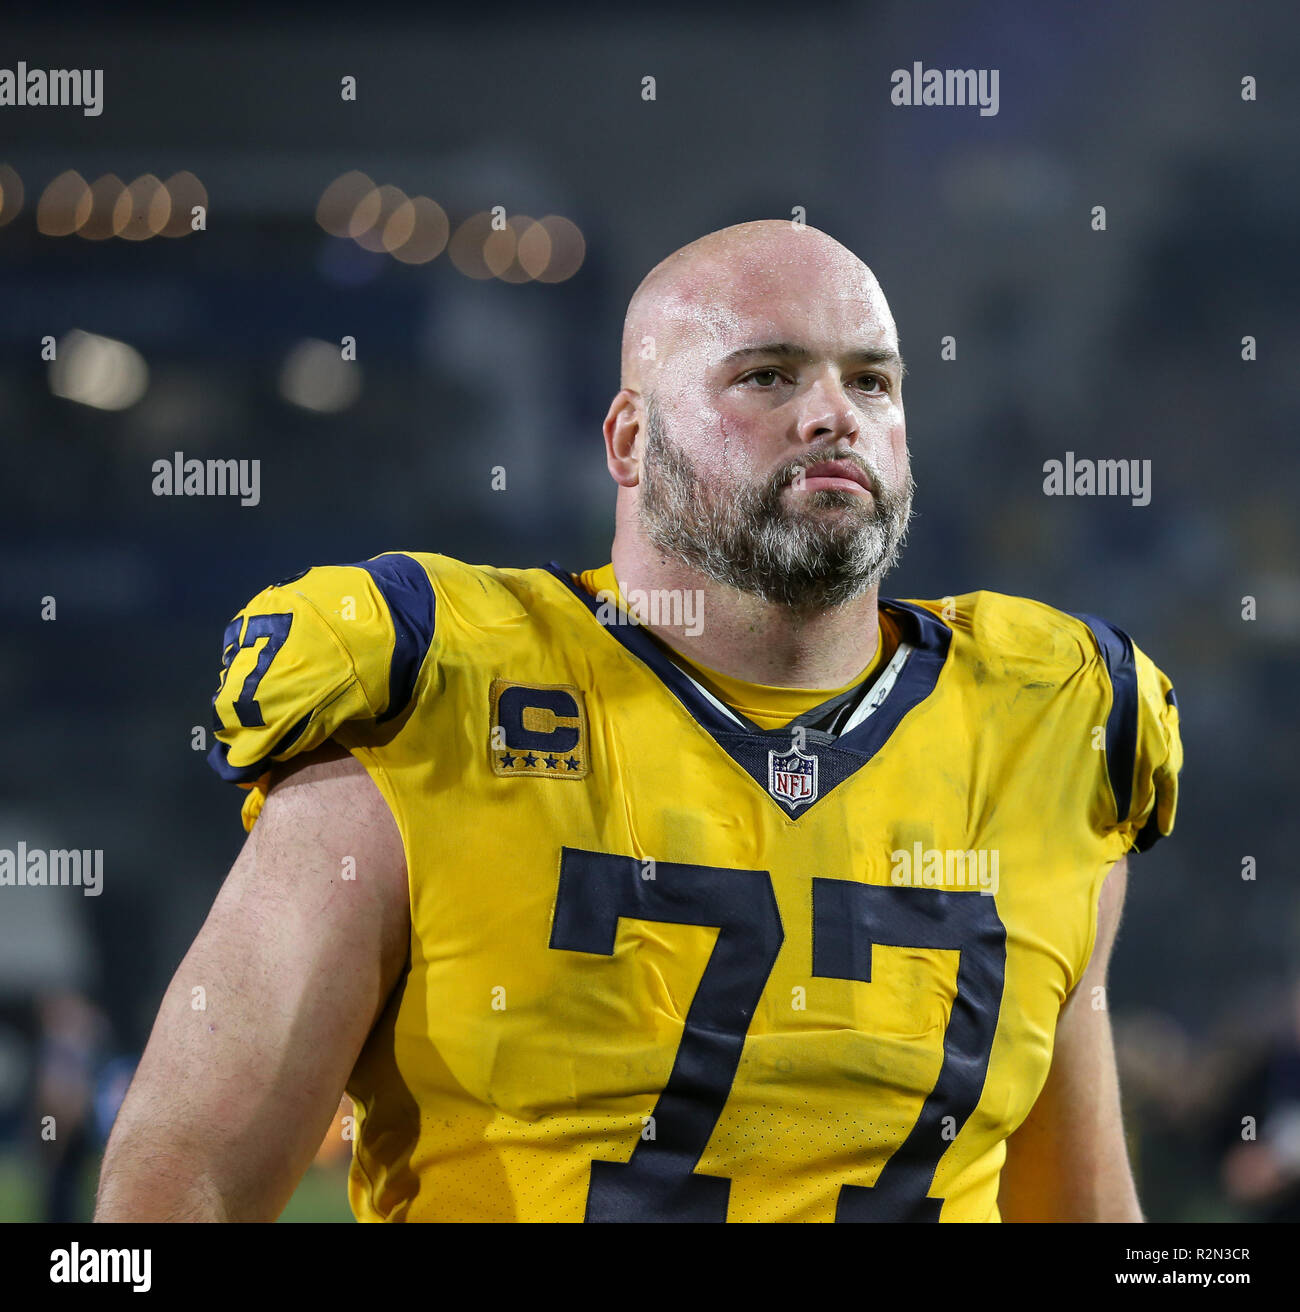 Los Angeles, CA, USA. 19th Nov, 2018. Los Angeles Rams offensive tackle  Andrew Whitworth #77 after the NFL Kansas City Chiefs vs Los Angeles Rams  at the Los Angeles Memorial Coliseum in